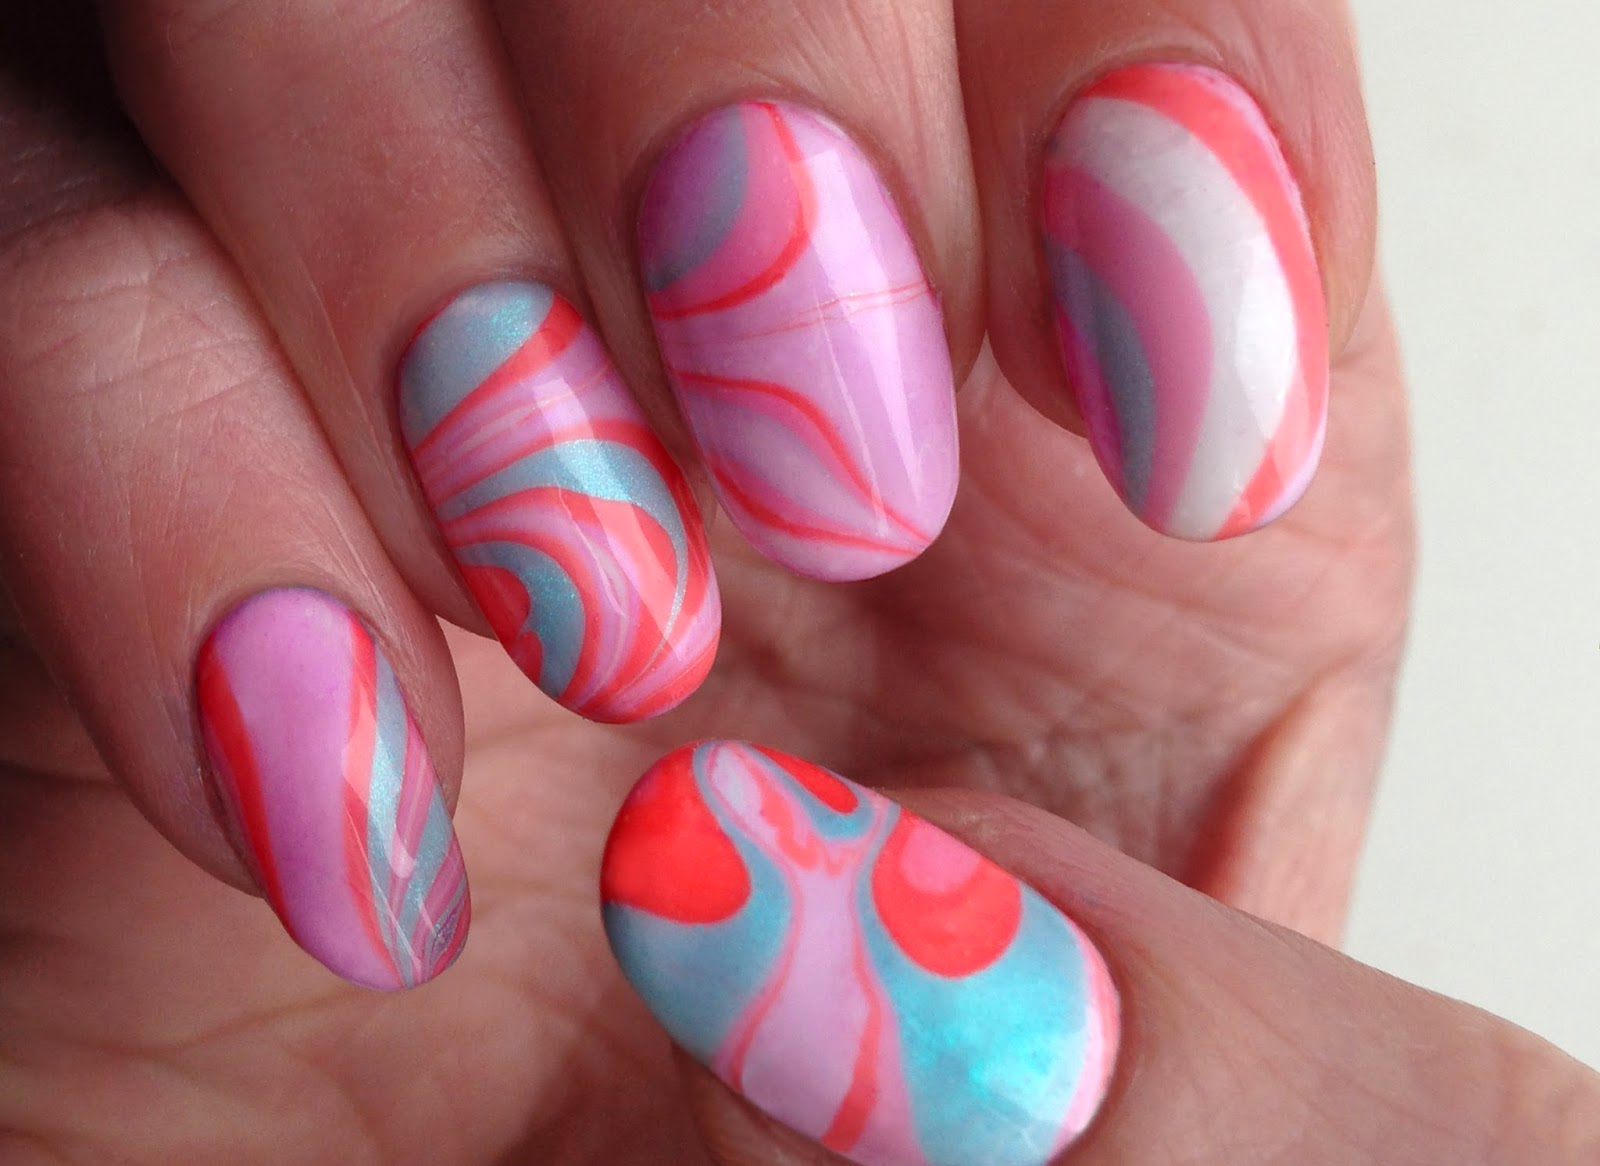 Black and White Water Marble Nail Art Designs - wide 4